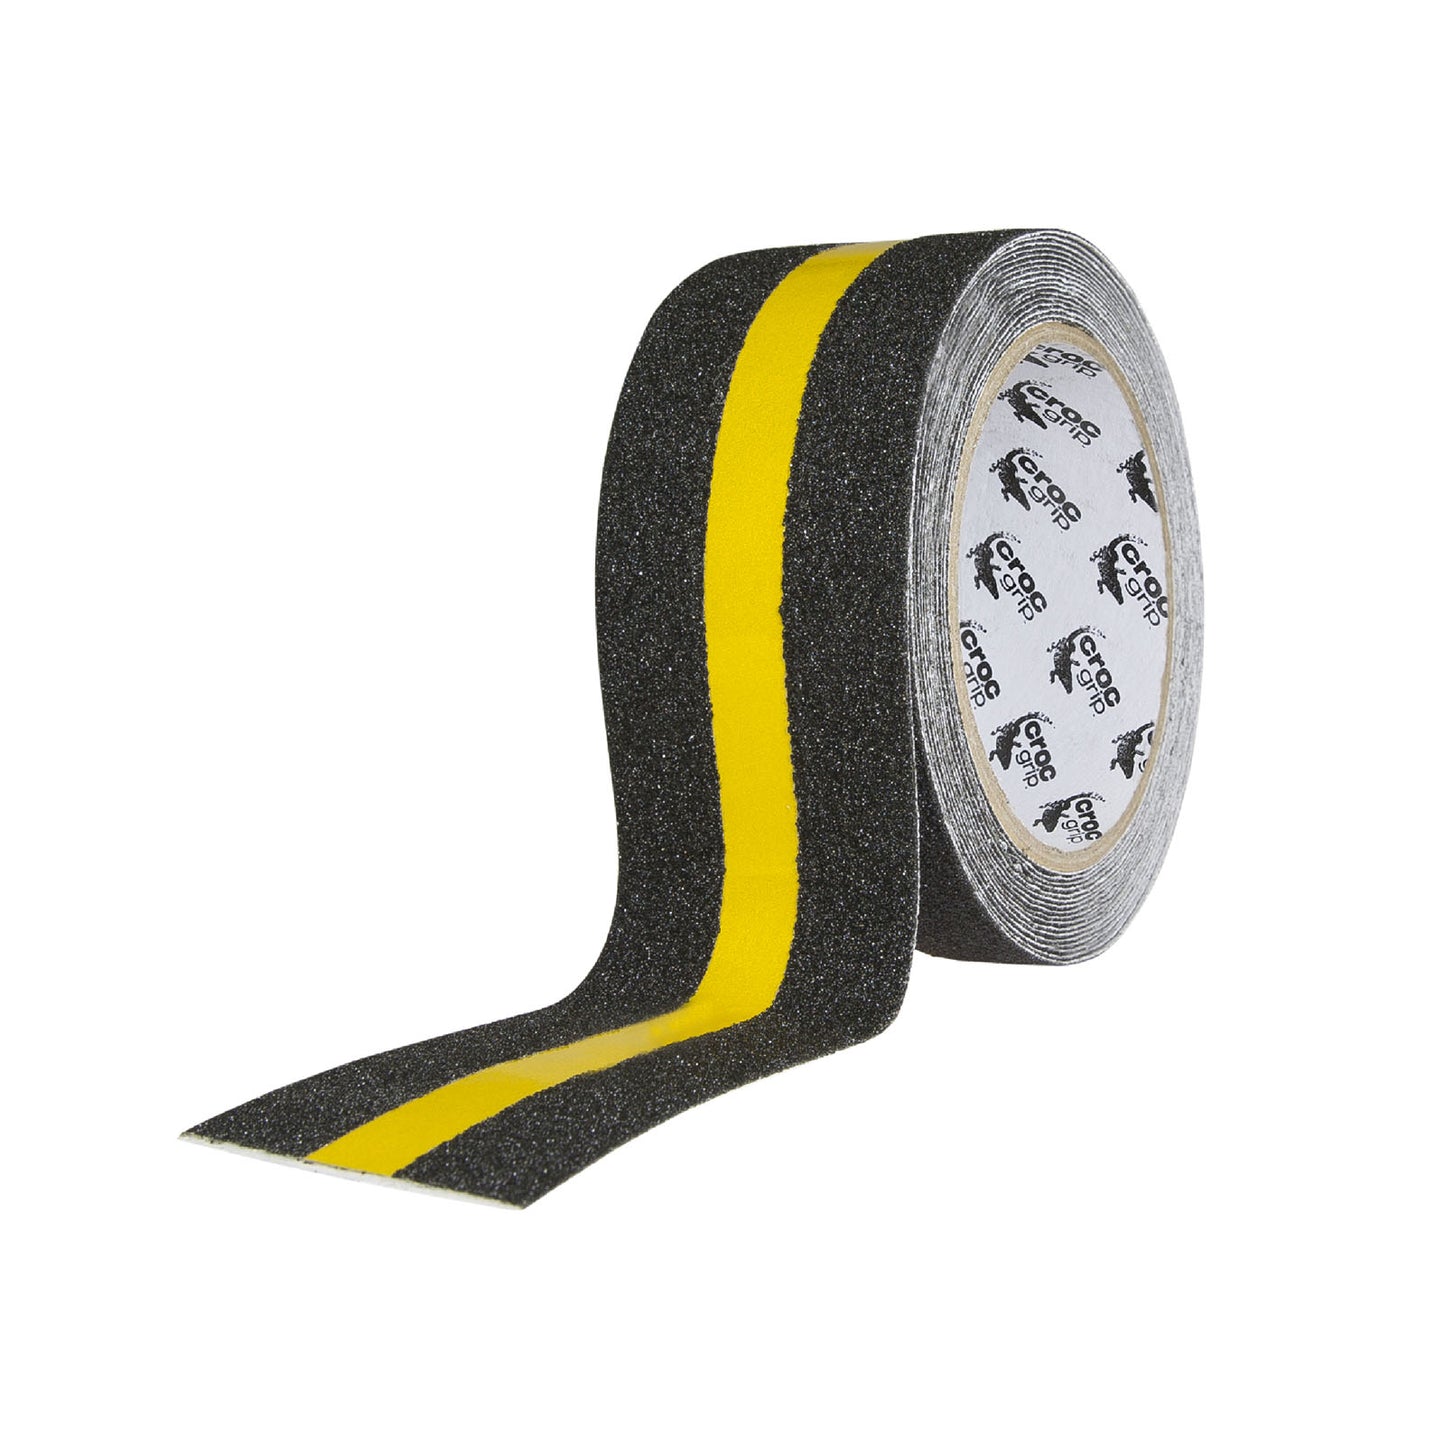 5M x 50MM Reflective Commercial High Grit Anti-Slip Tape